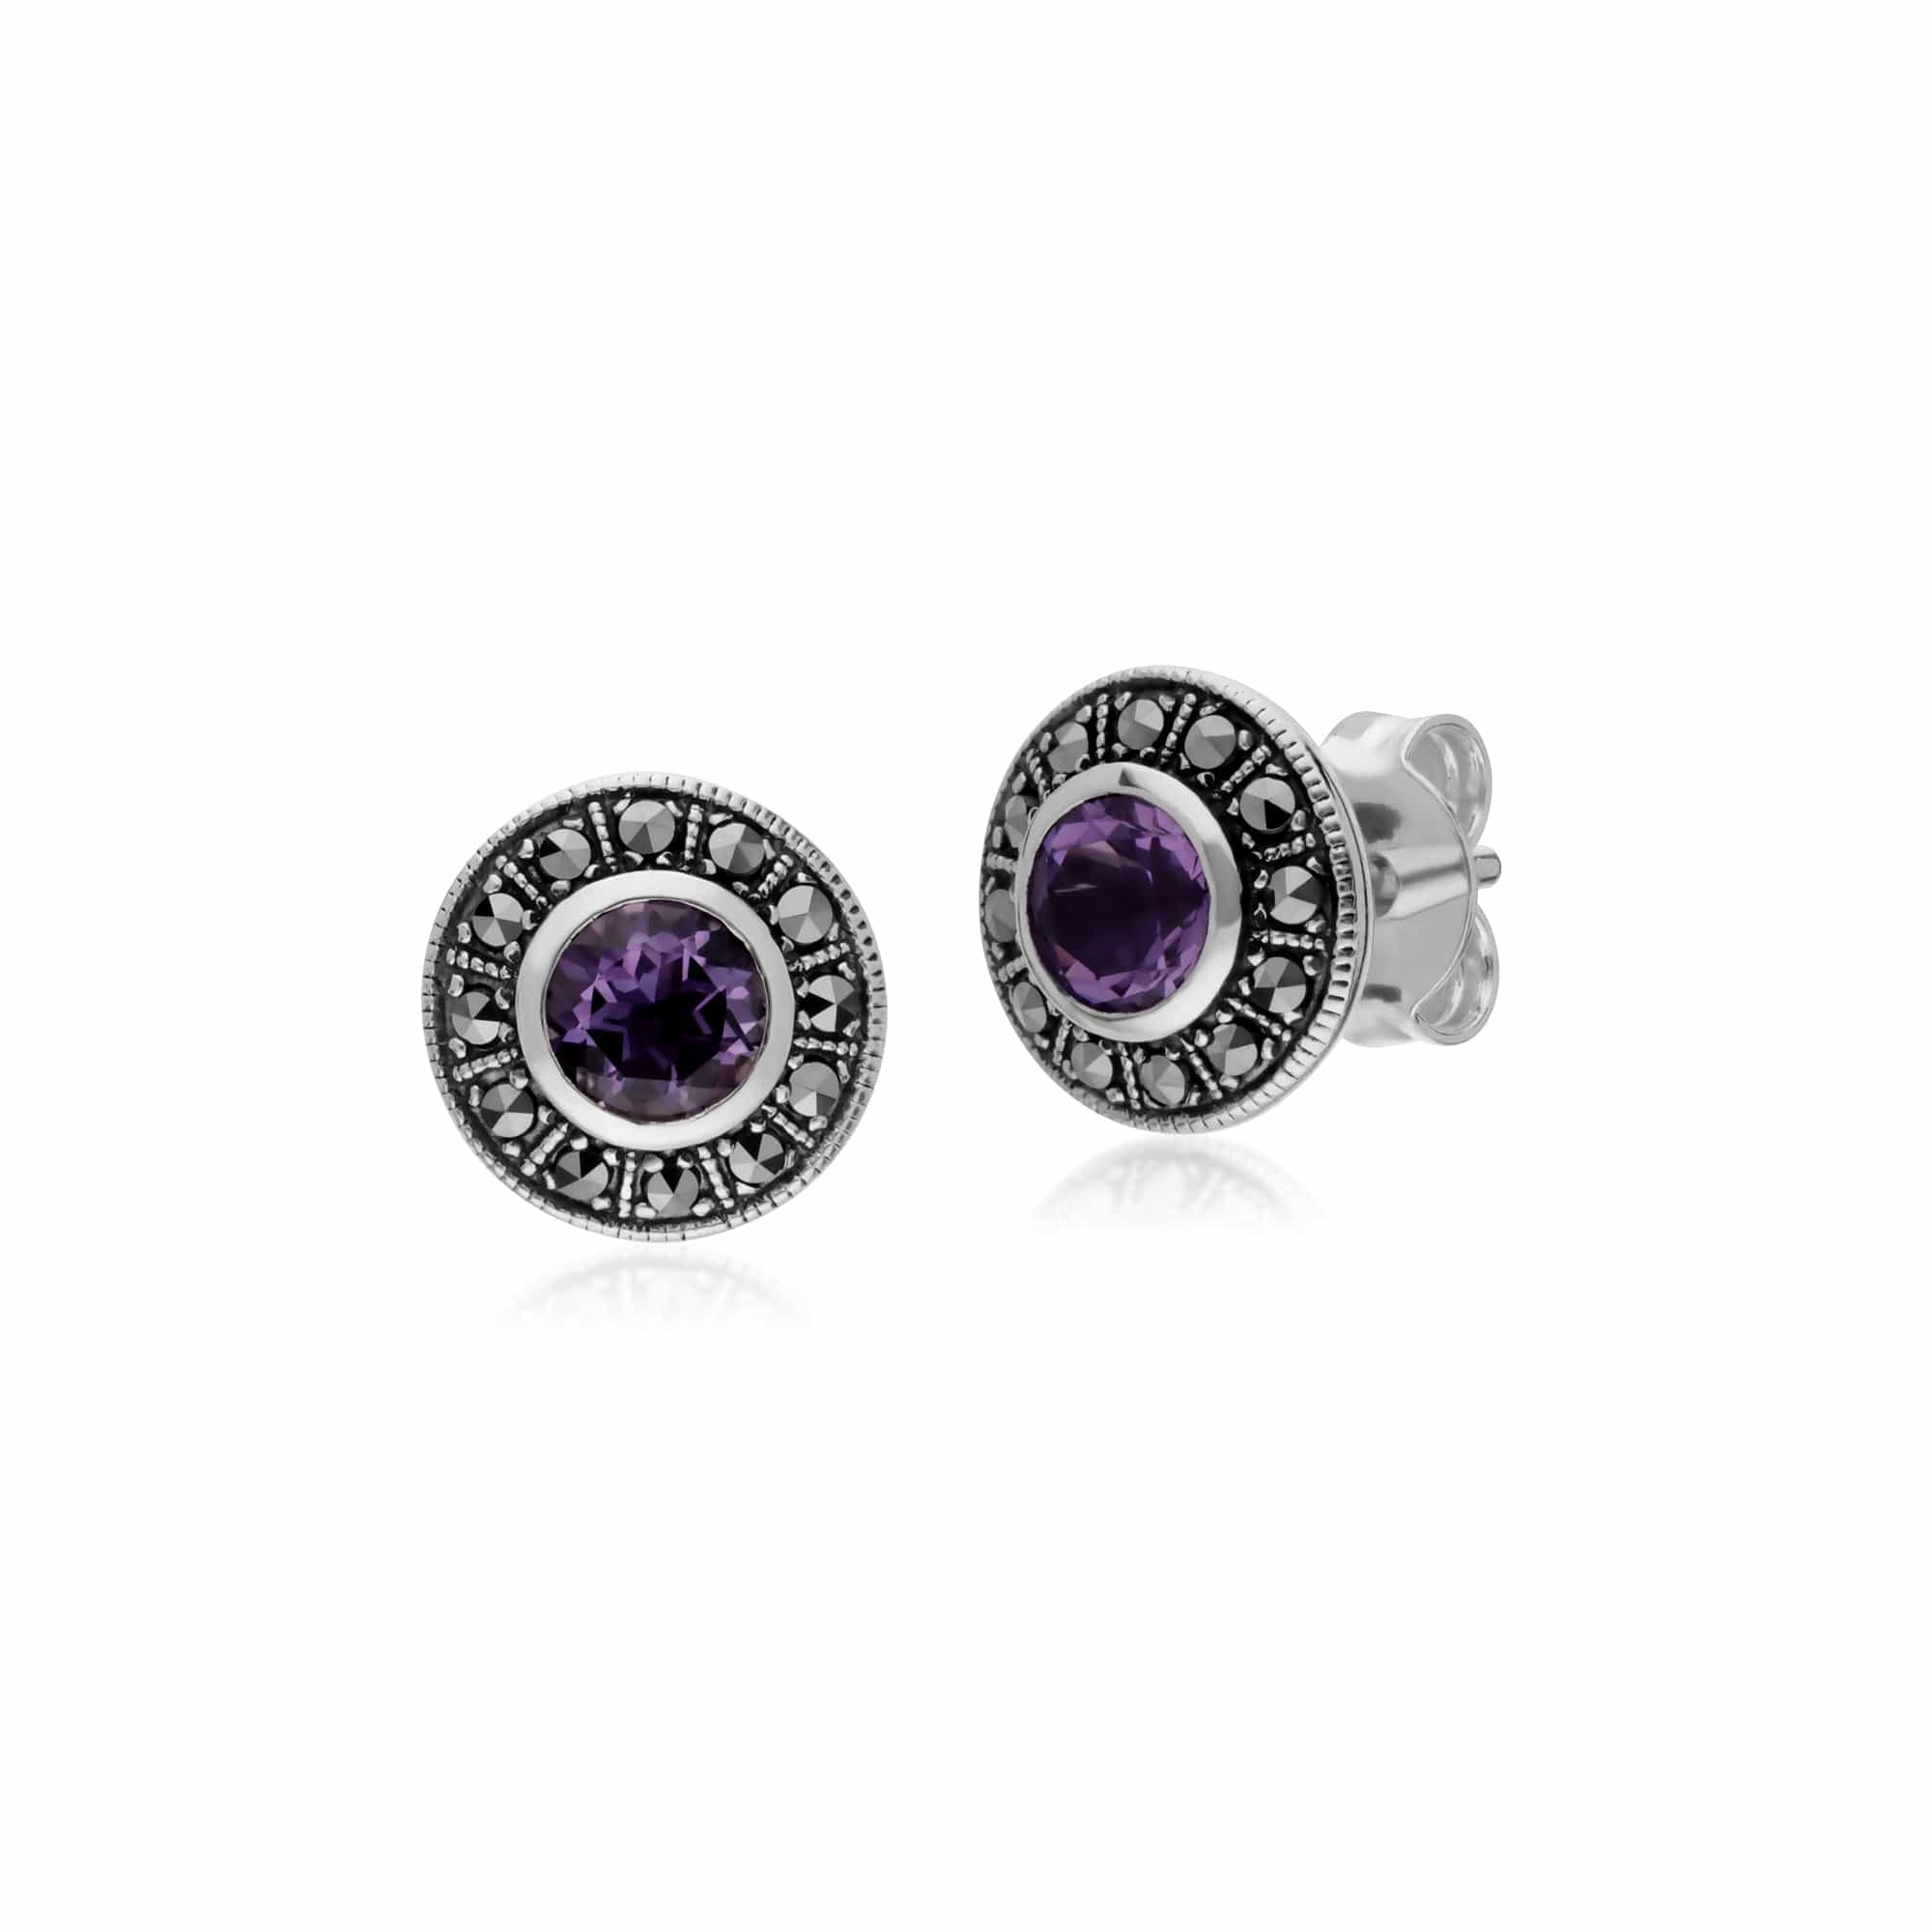 214E872701925-214N707301925 Art Deco Style Round Amethyst and Marcasite Cluster Stud Earrings & Pendant Set in 925 Sterling Silver 2